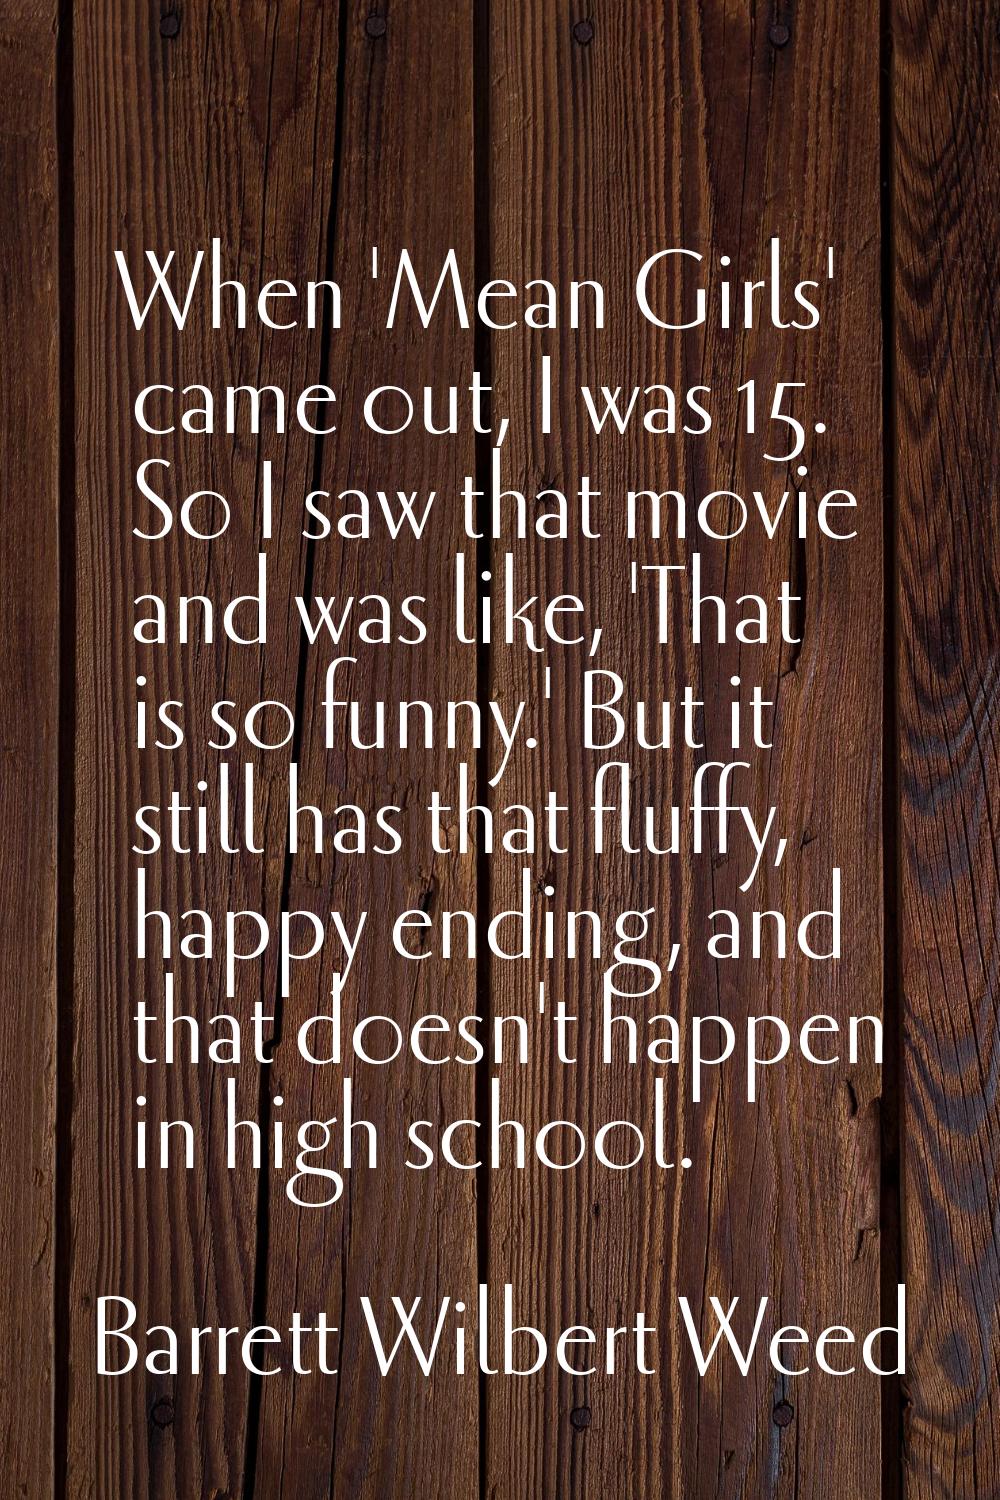 When 'Mean Girls' came out, I was 15. So I saw that movie and was like, 'That is so funny.' But it 